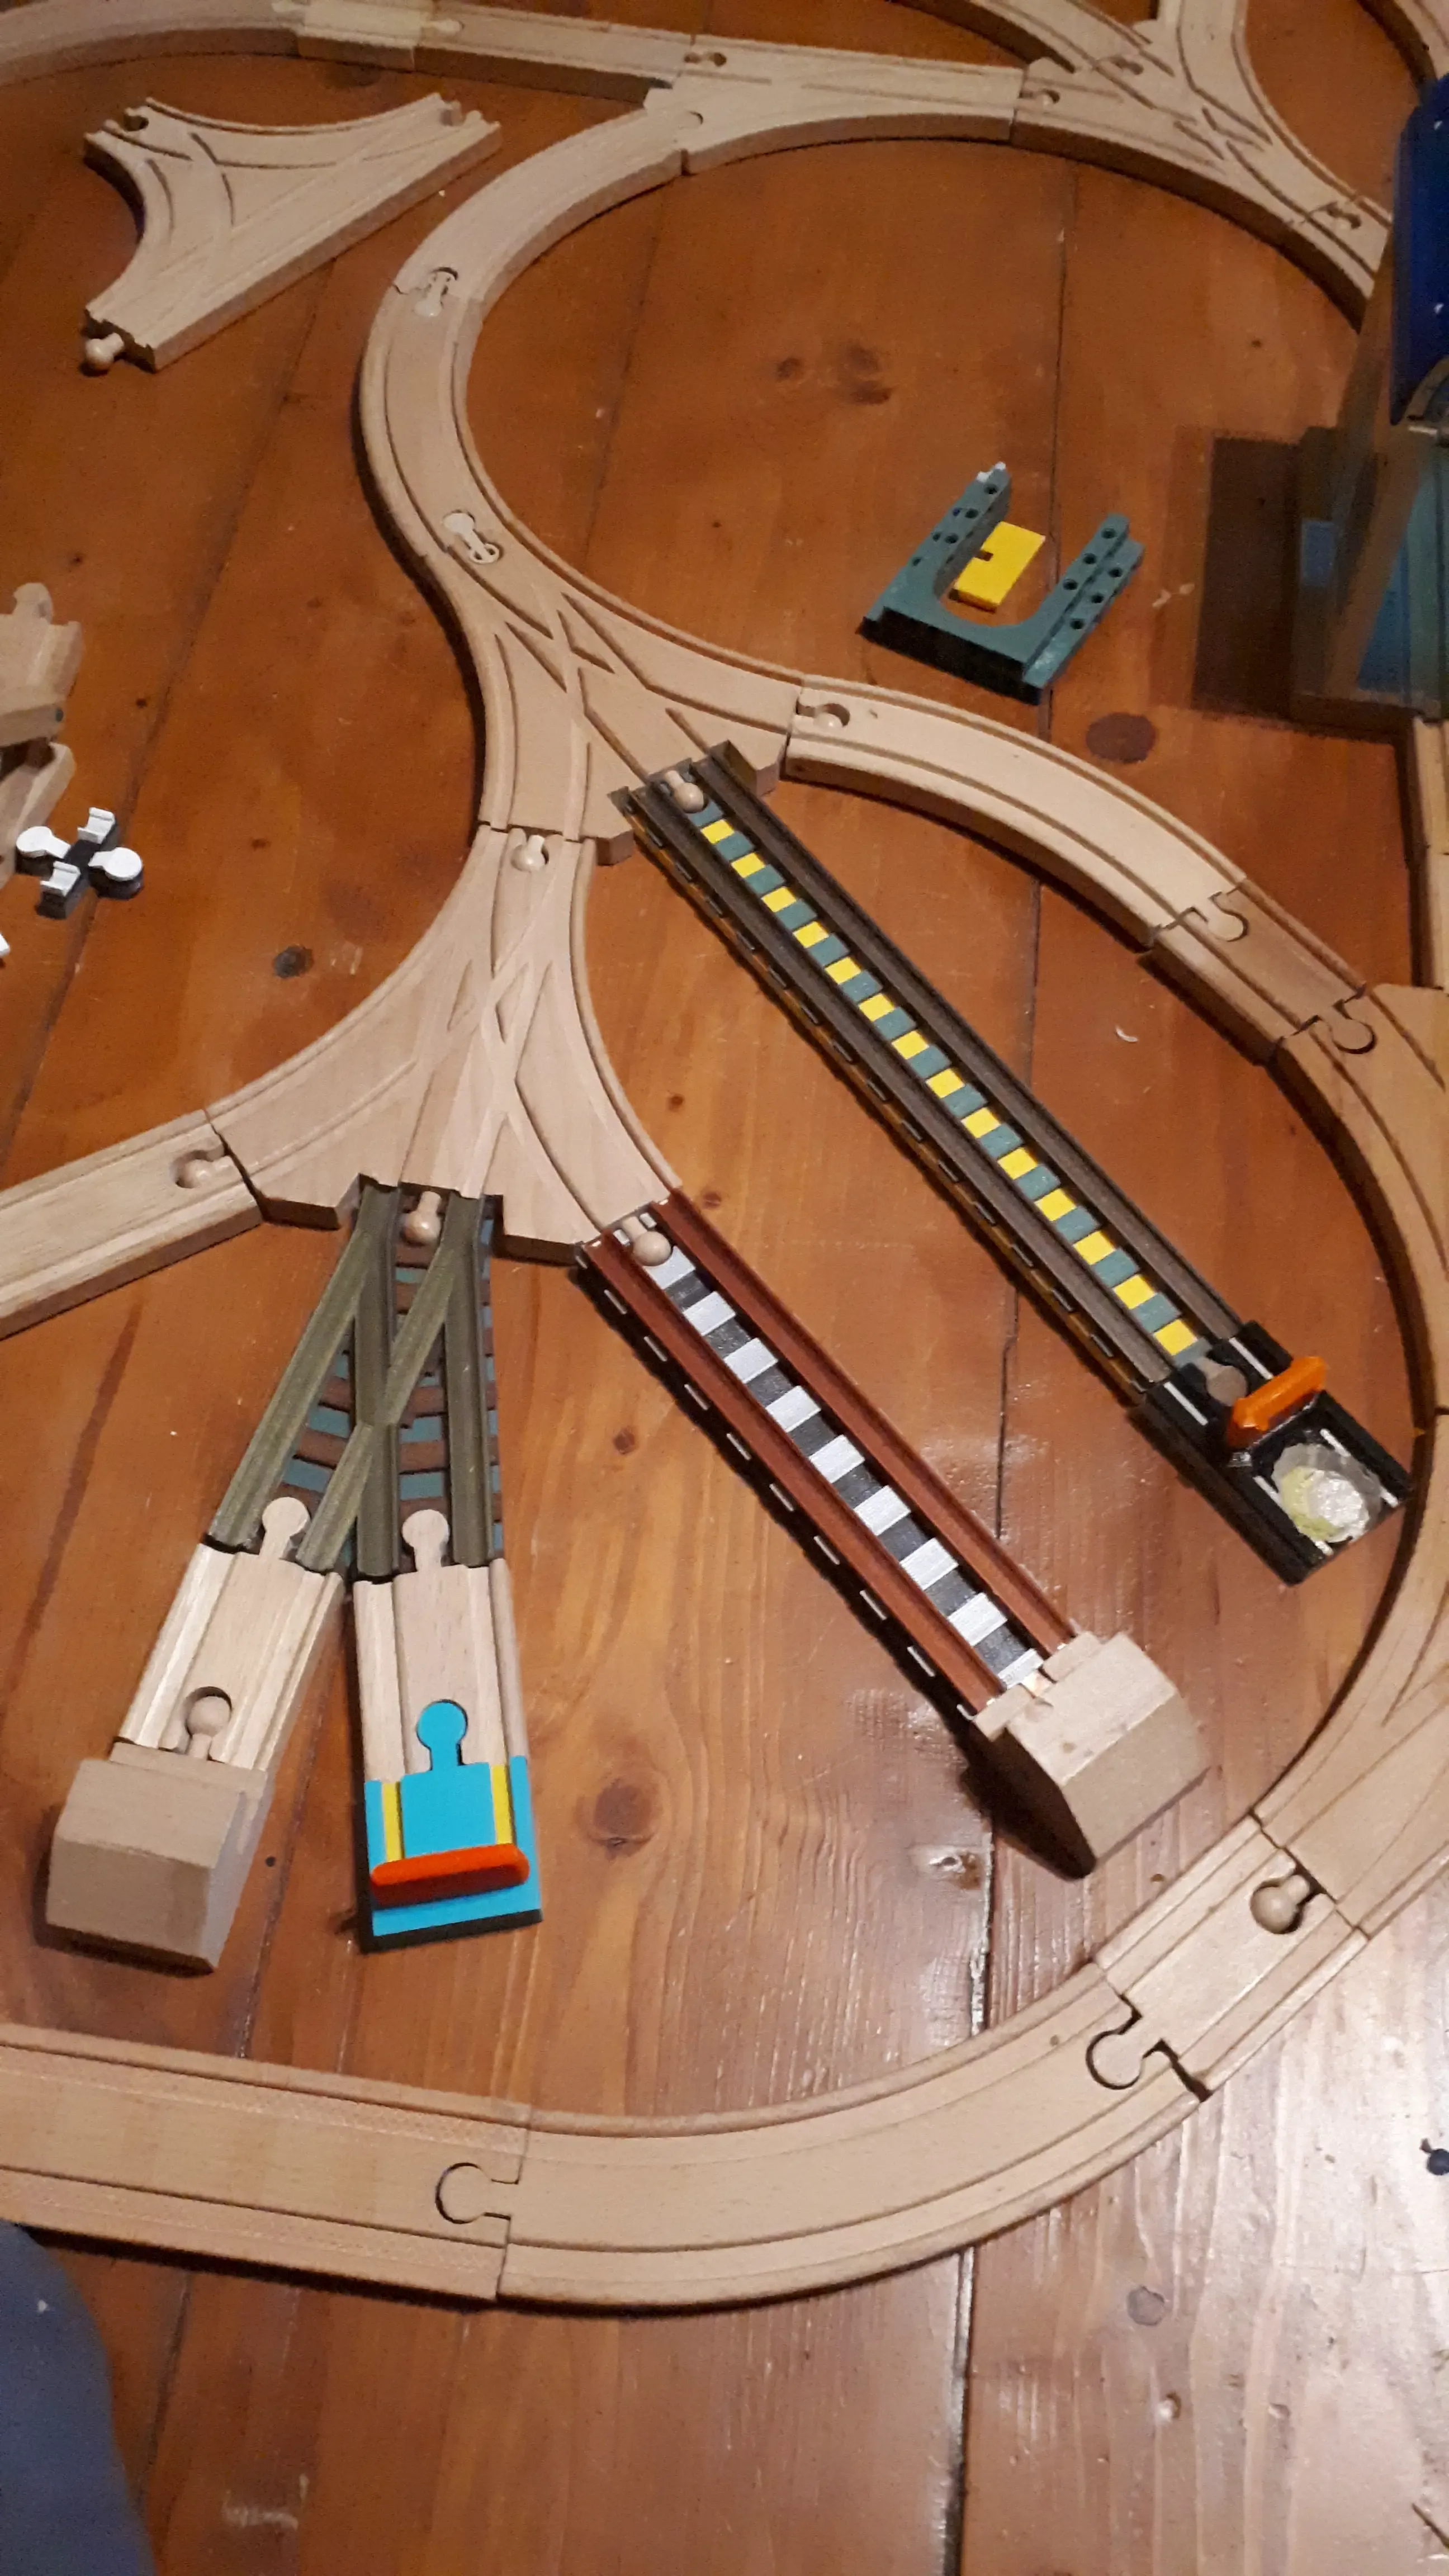 Wooden Railroad with sleepers